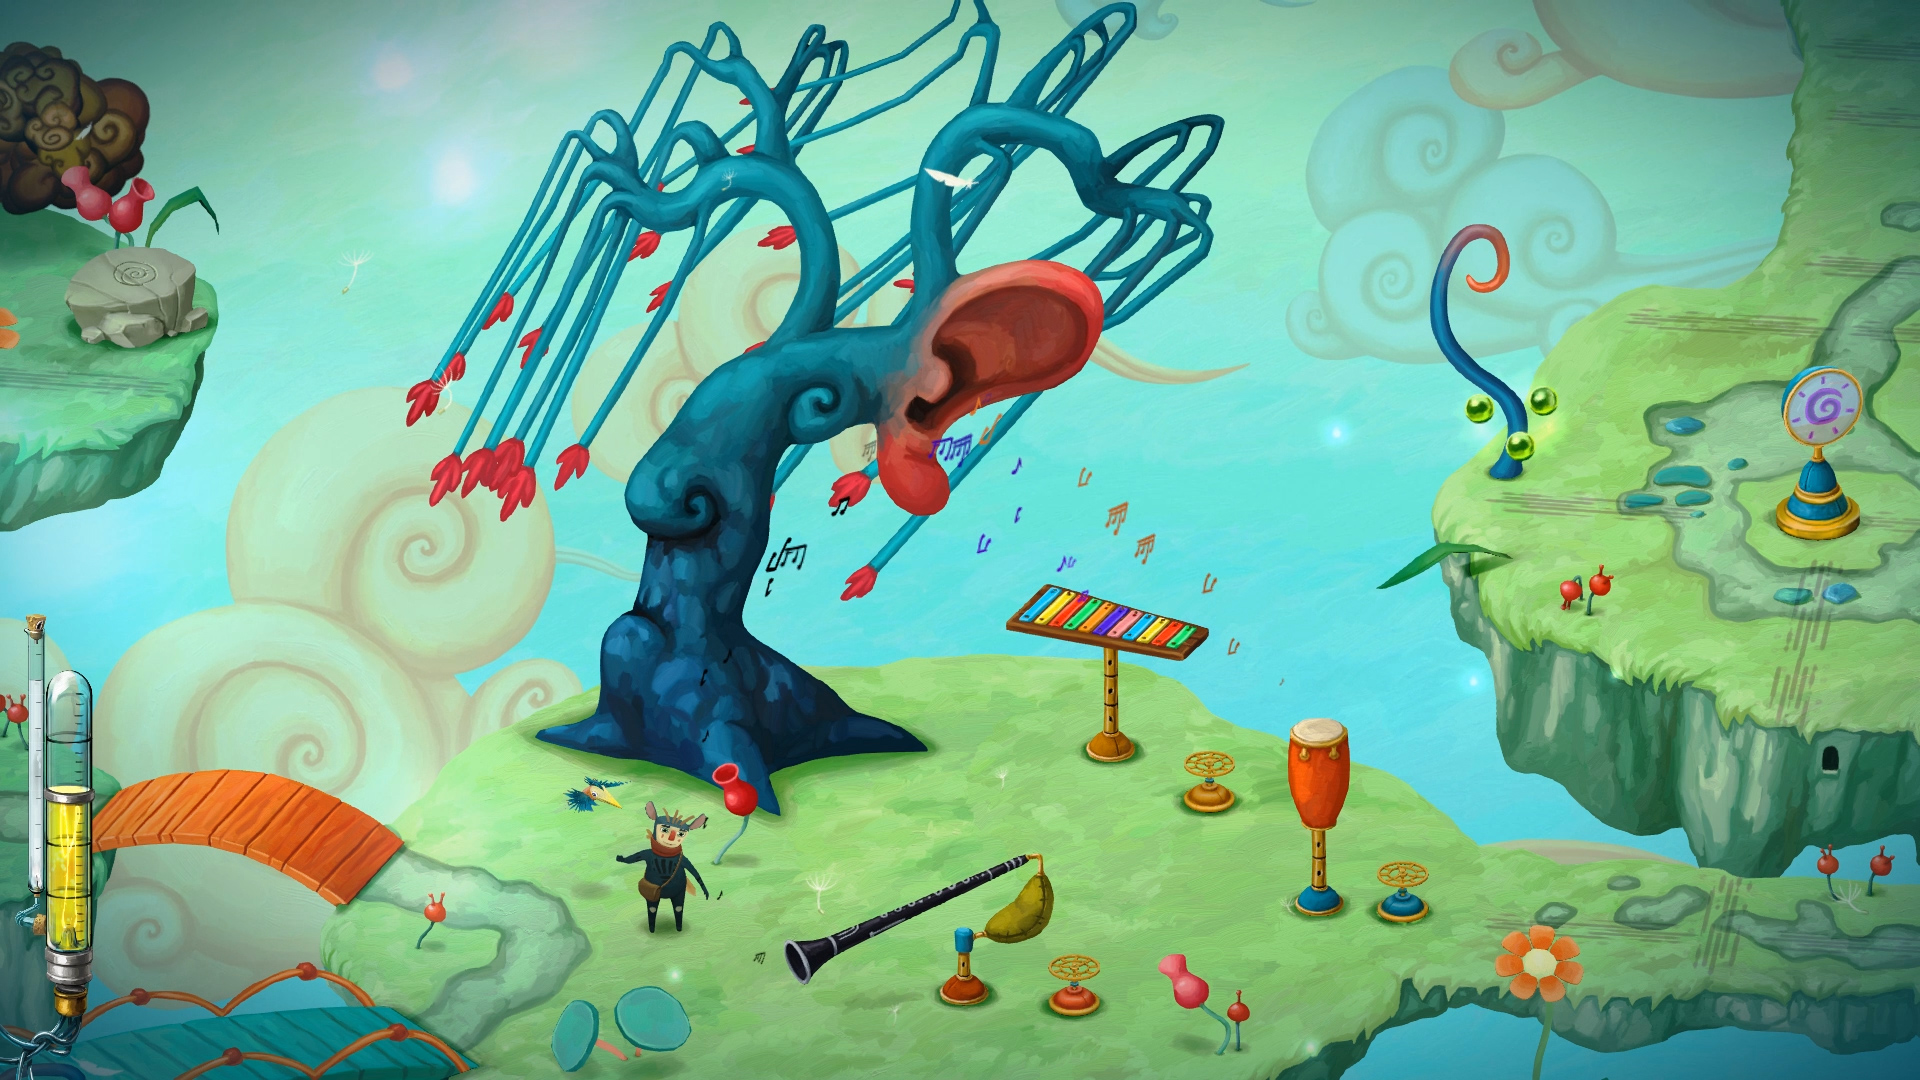 A free Figment demo is now available on Steam